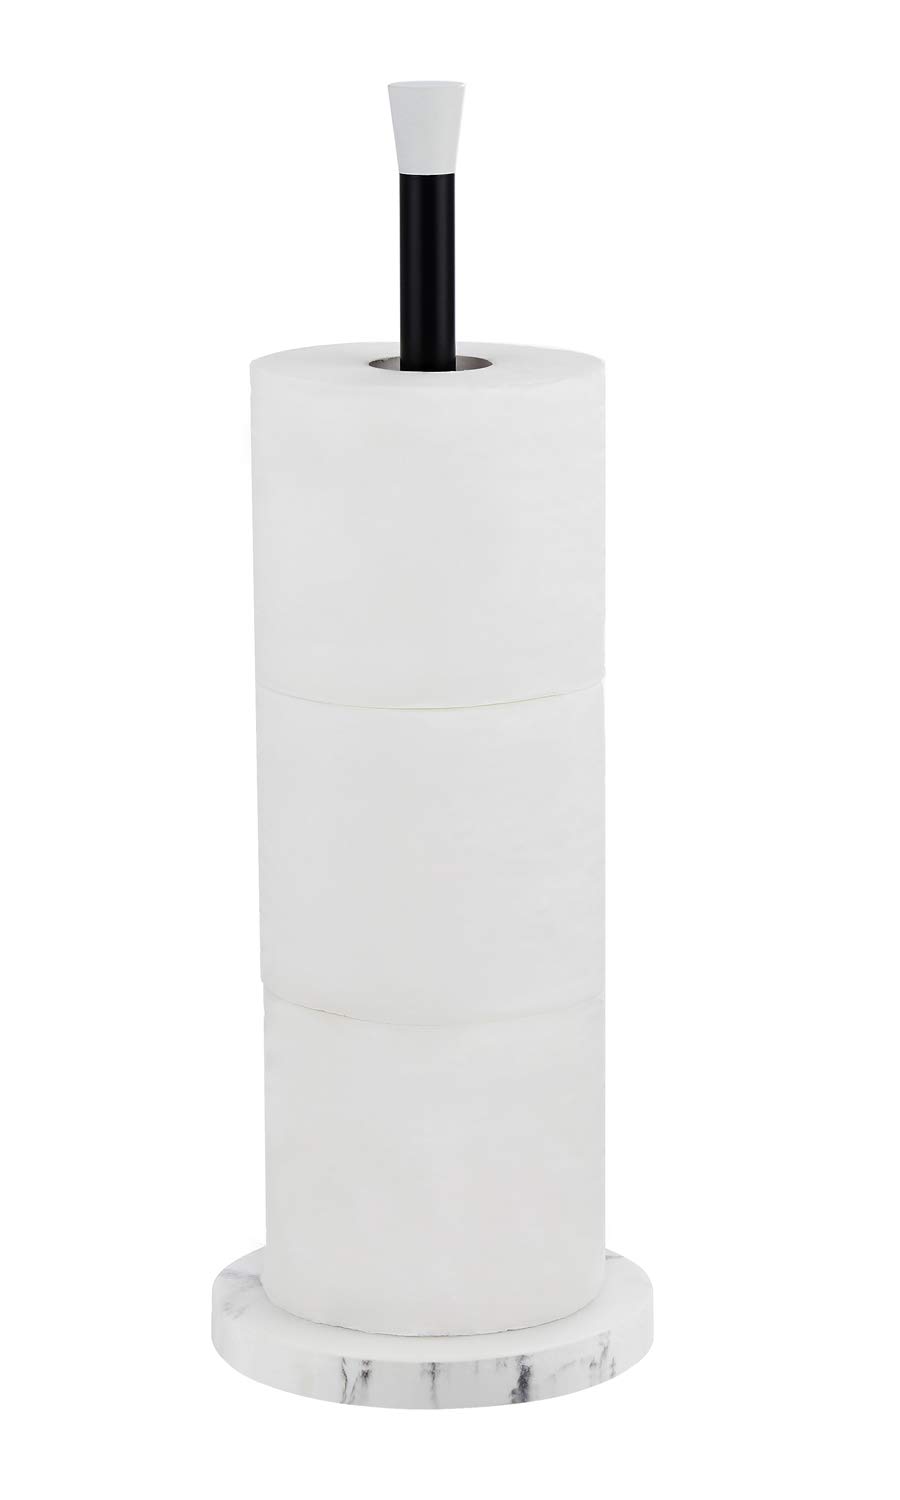 zccz Free Standing Toilet Paper Holder, Bathroom Toilet Tissue Roll